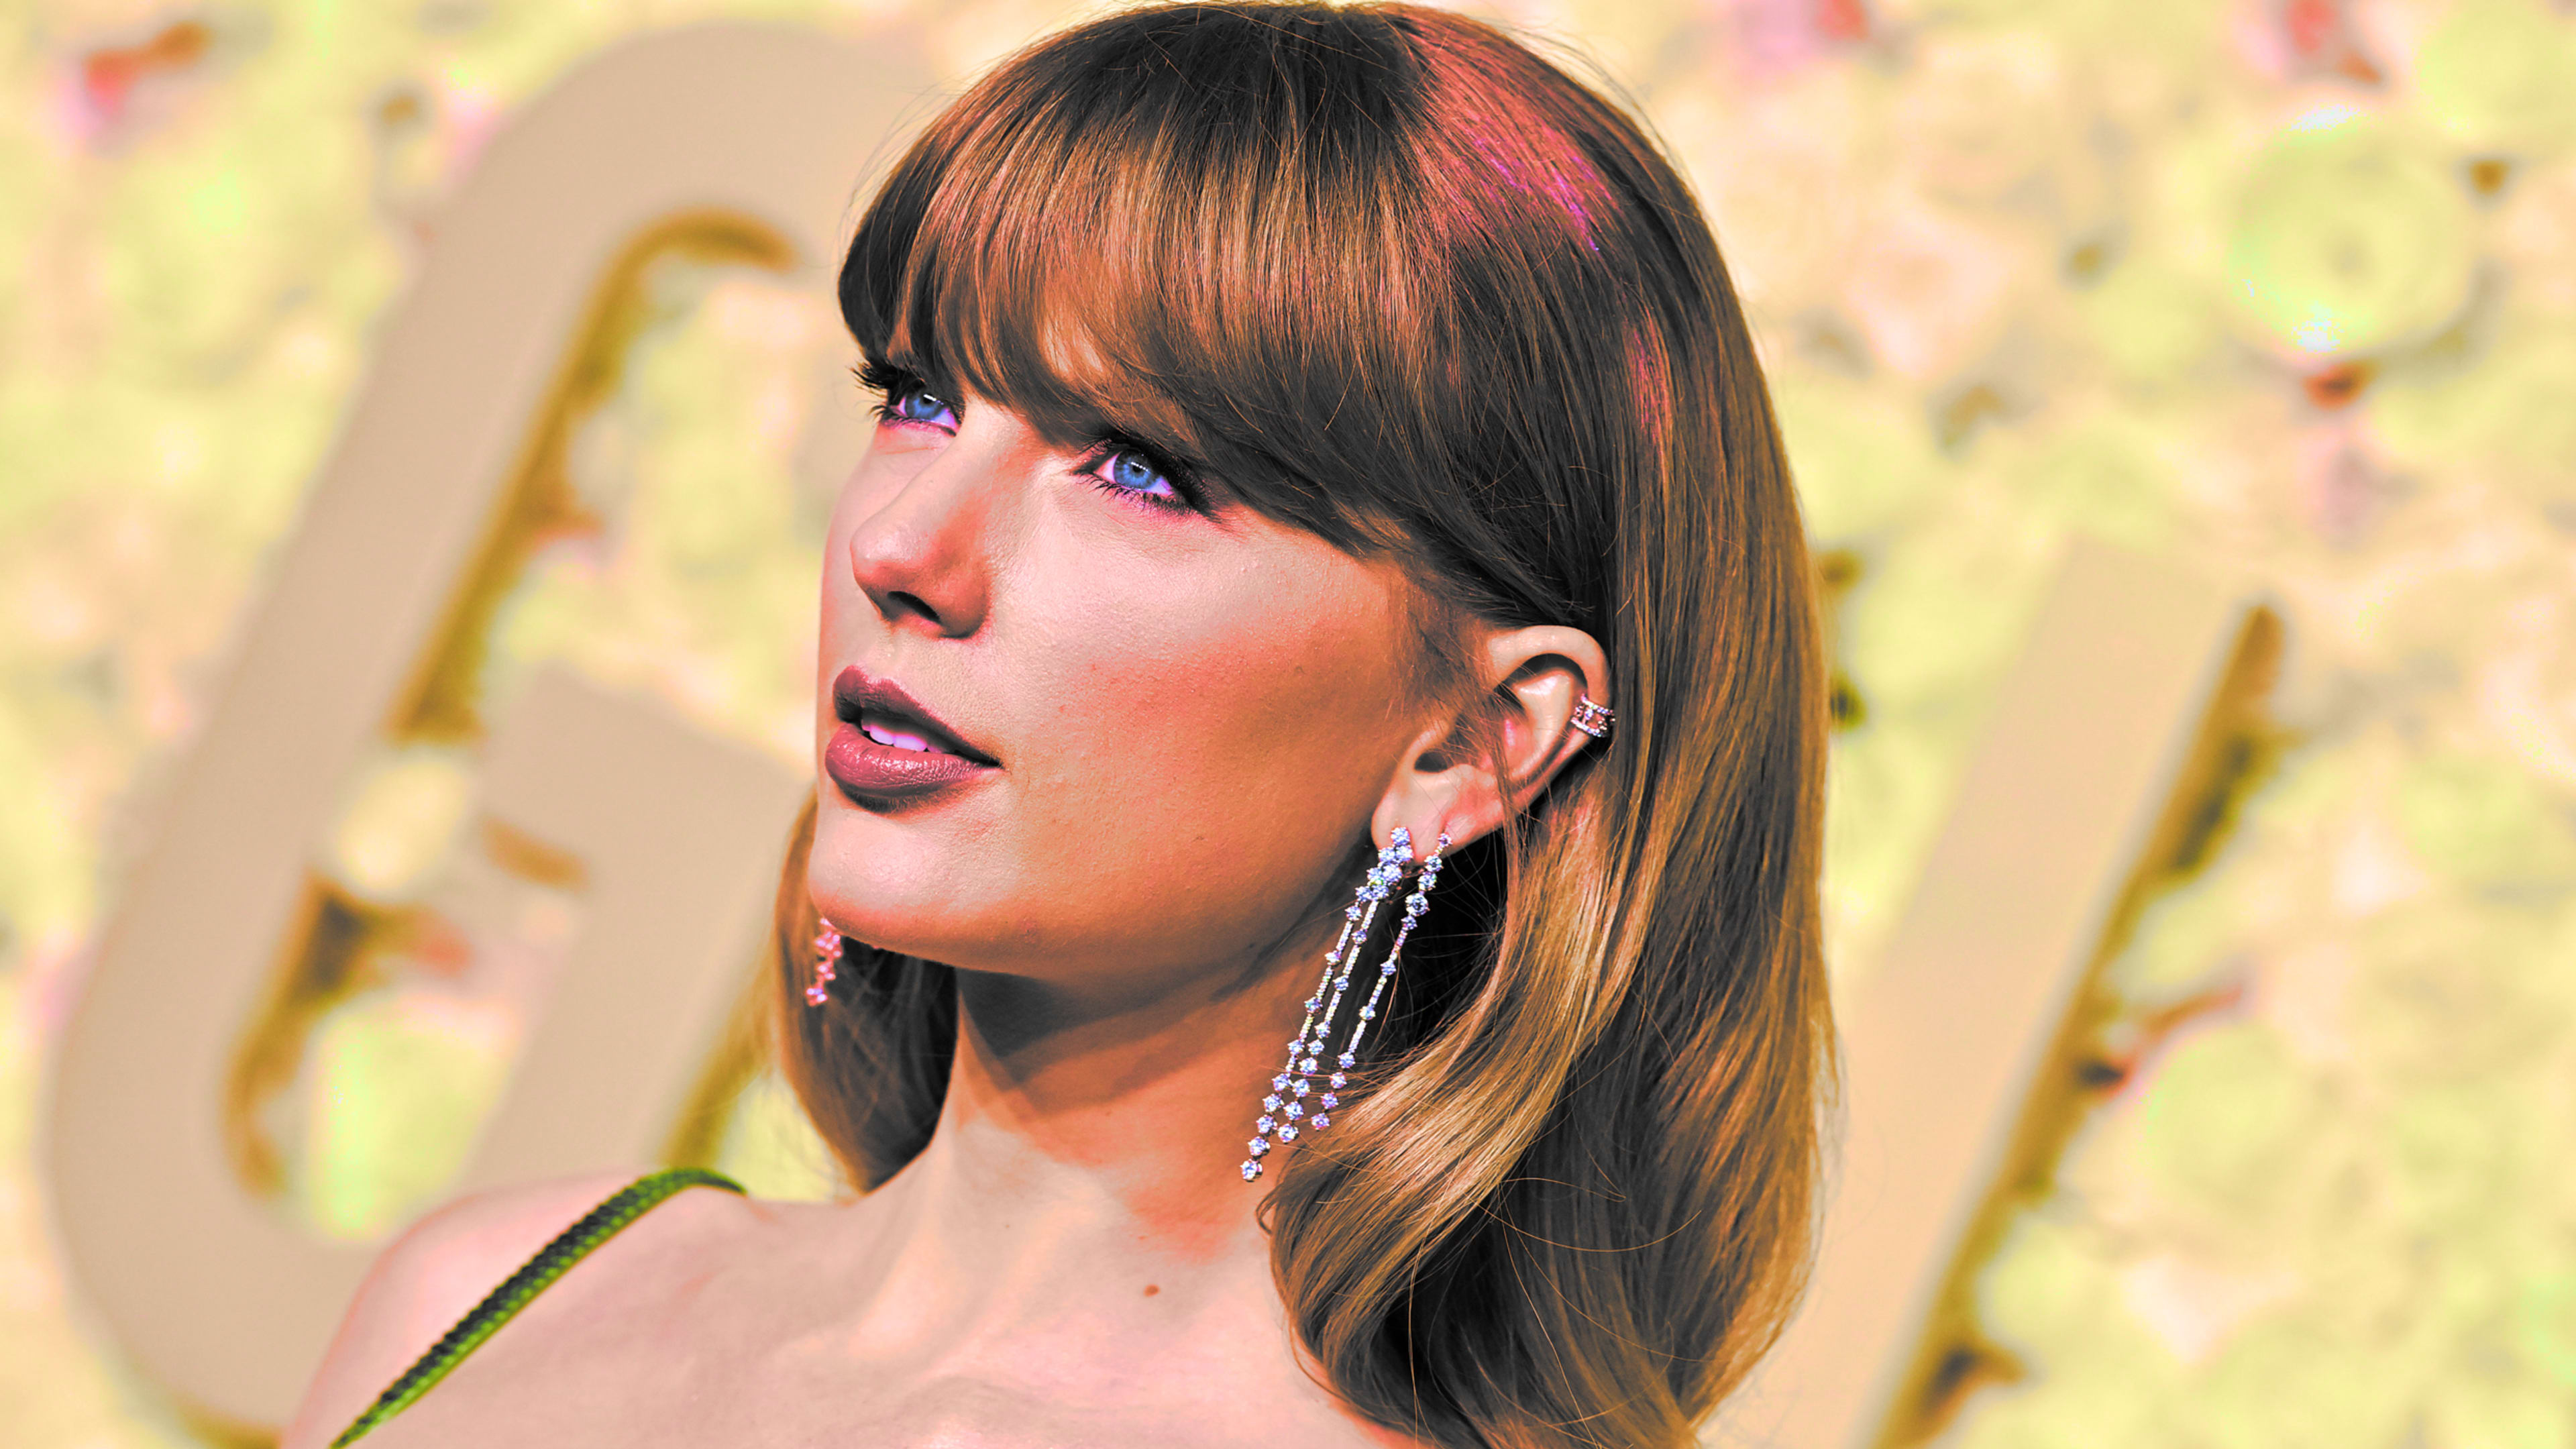 The explicit AI-created images of Taylor Swift flooding the internet highlight a major problem with generative AI